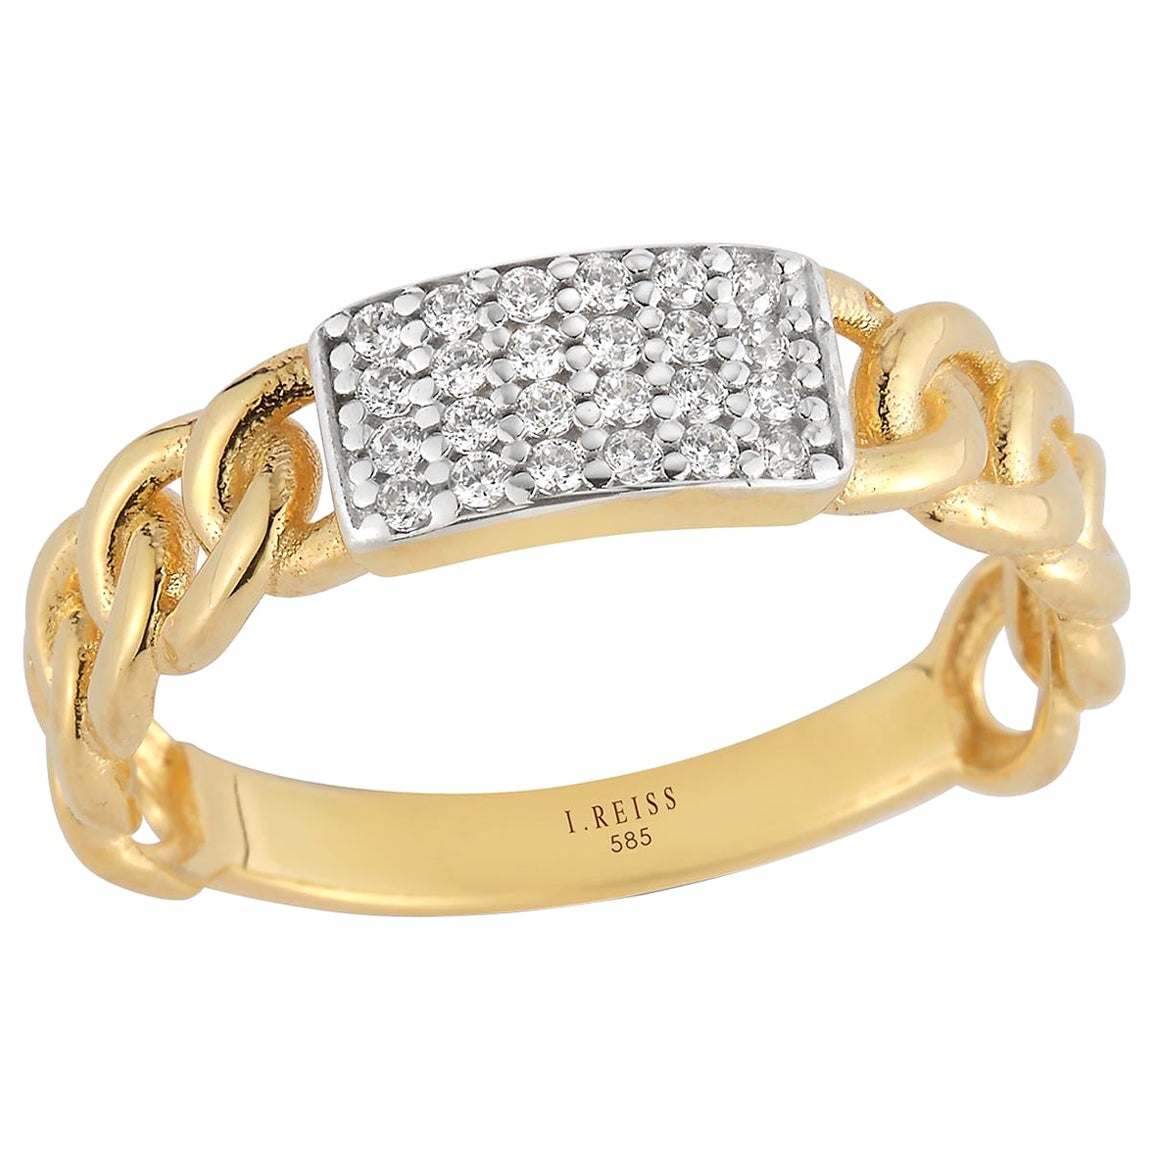 Handcrafted 14k Yellow Gold 0.14cttw Braided ID Ring